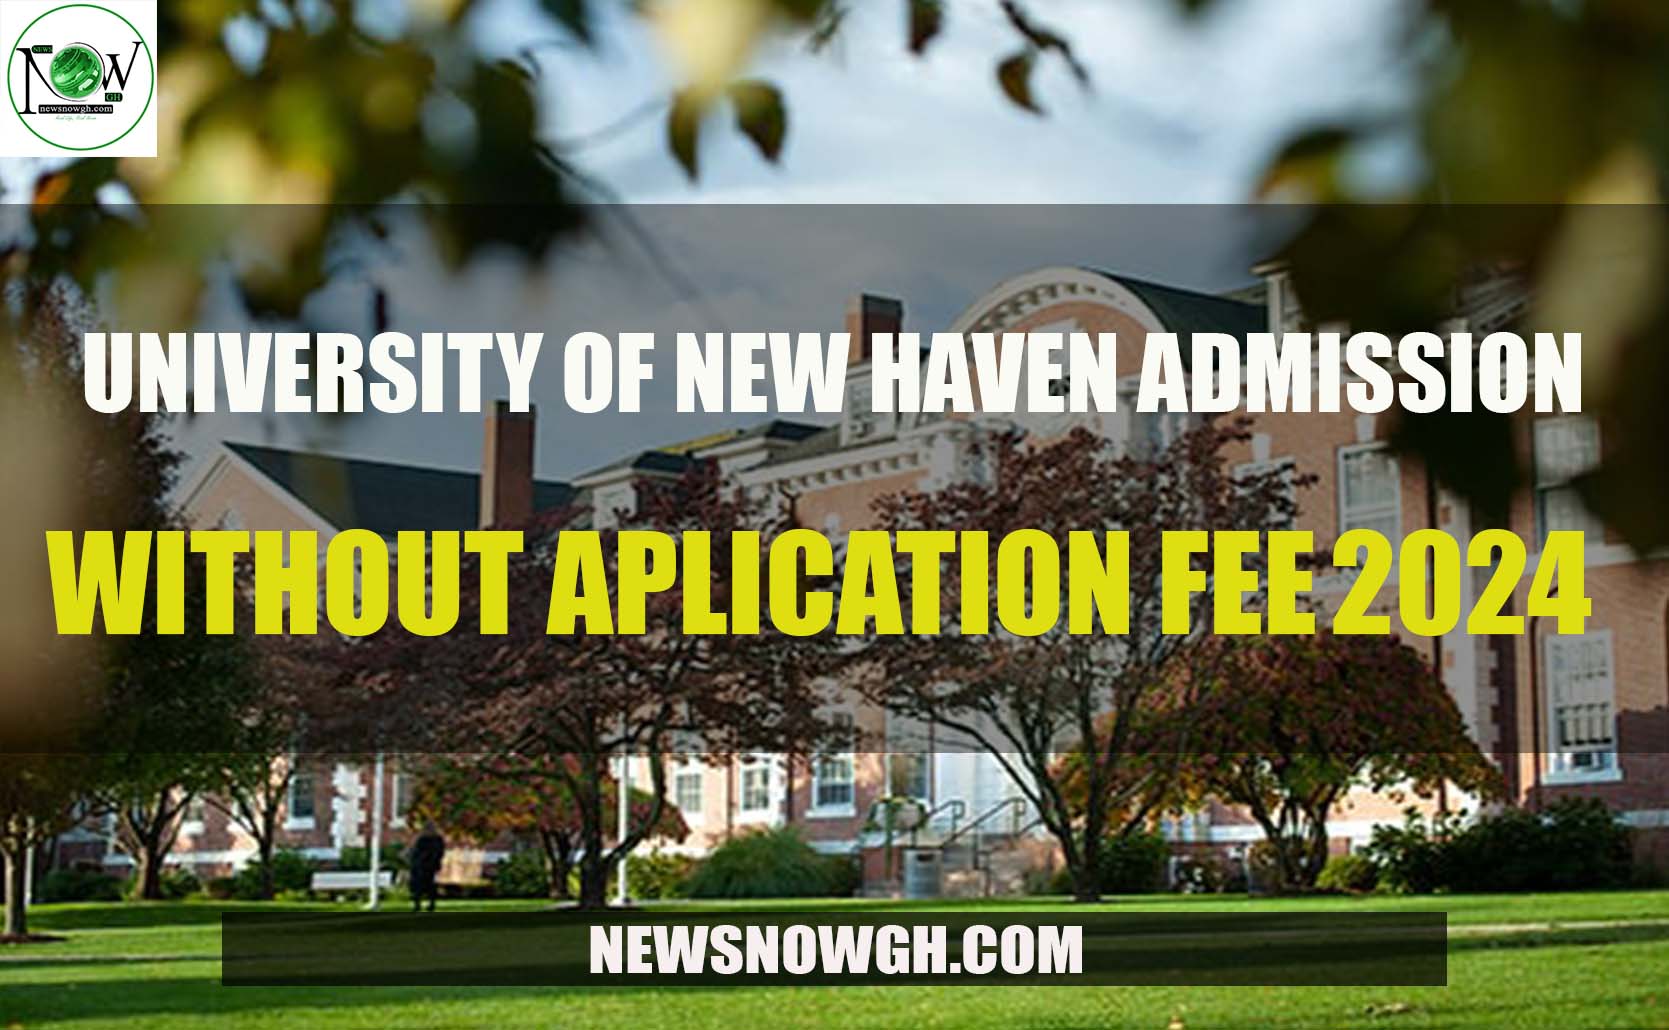 University of New Haven admissions without application fee for 2024